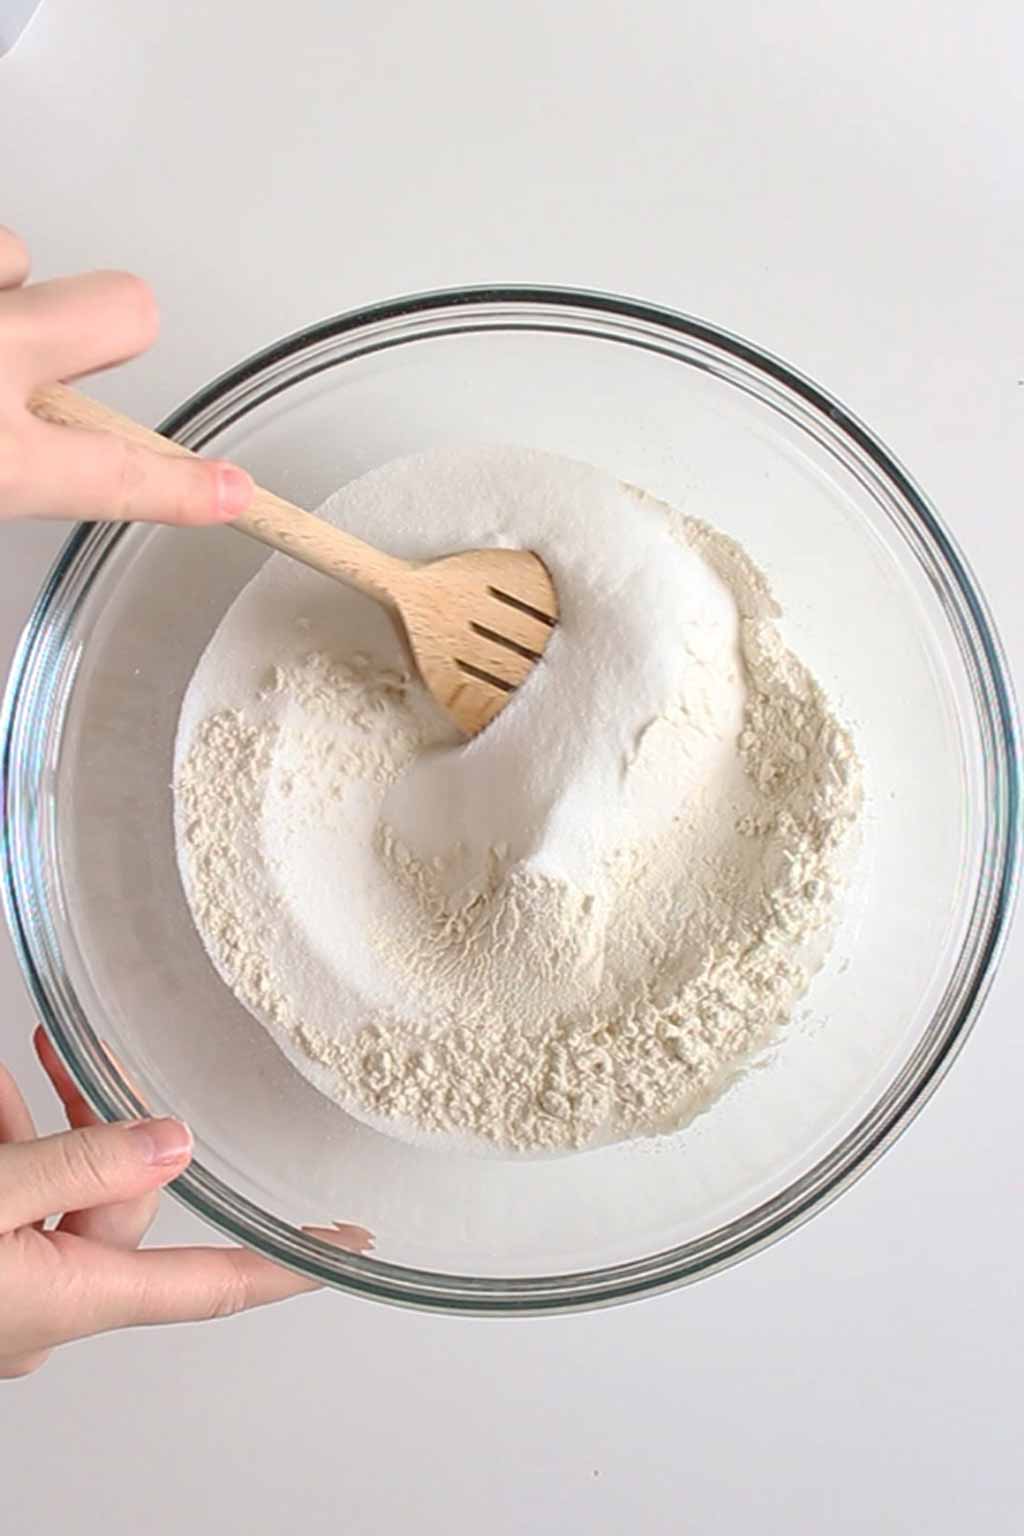 Mixing Dry Ingredients In A Bowl